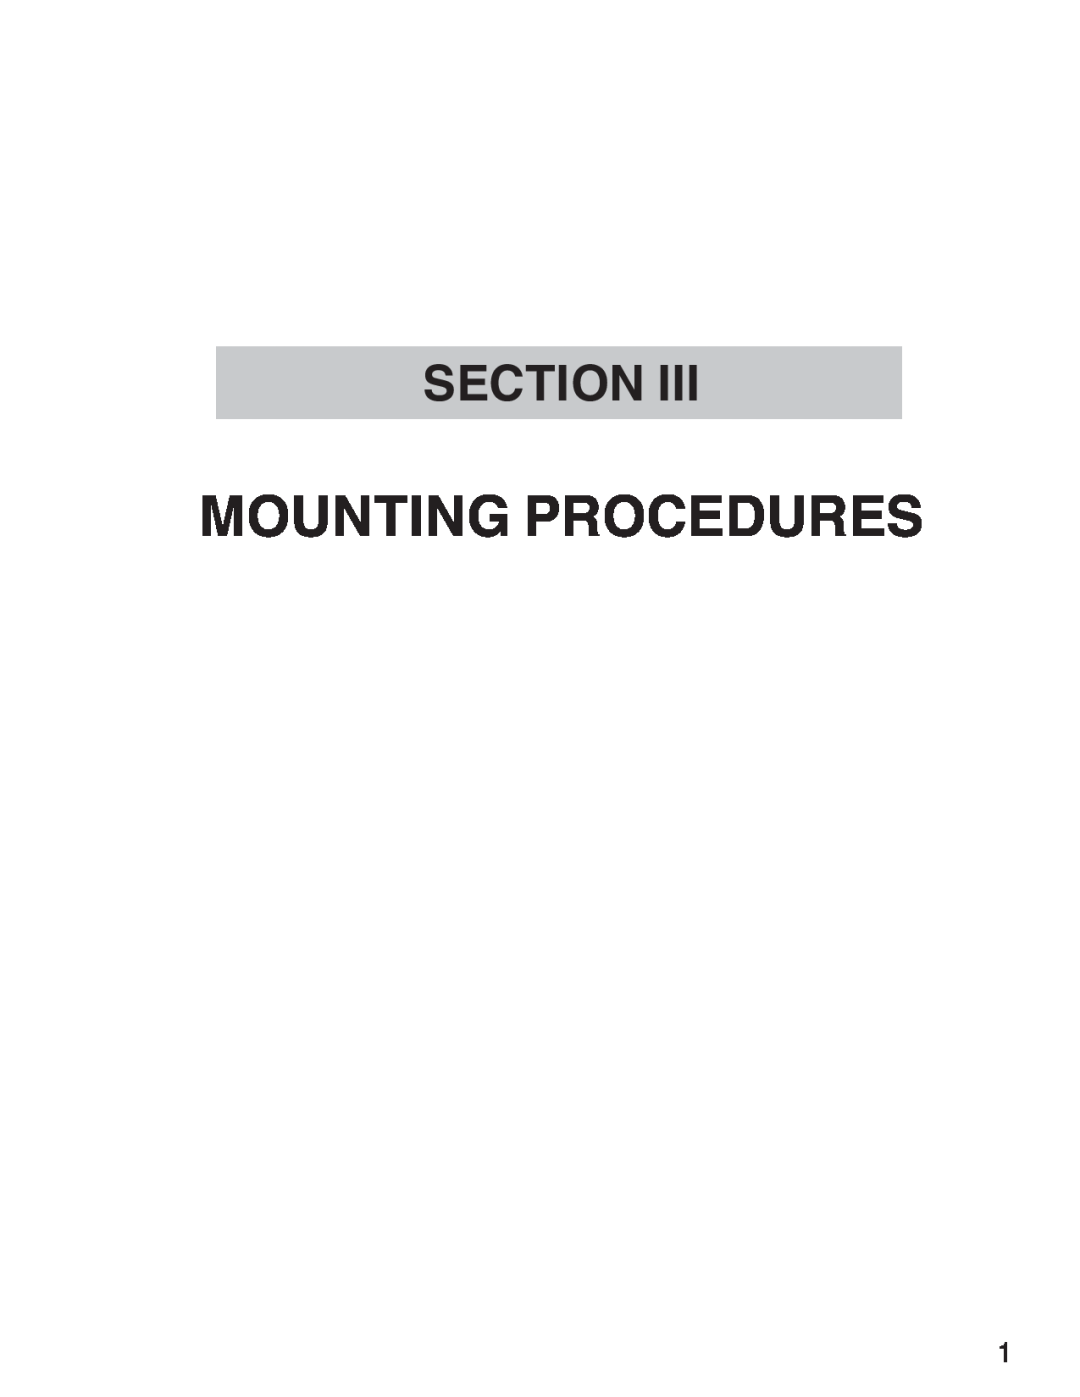 ATN 3 manual Mounting Procedures, Section 